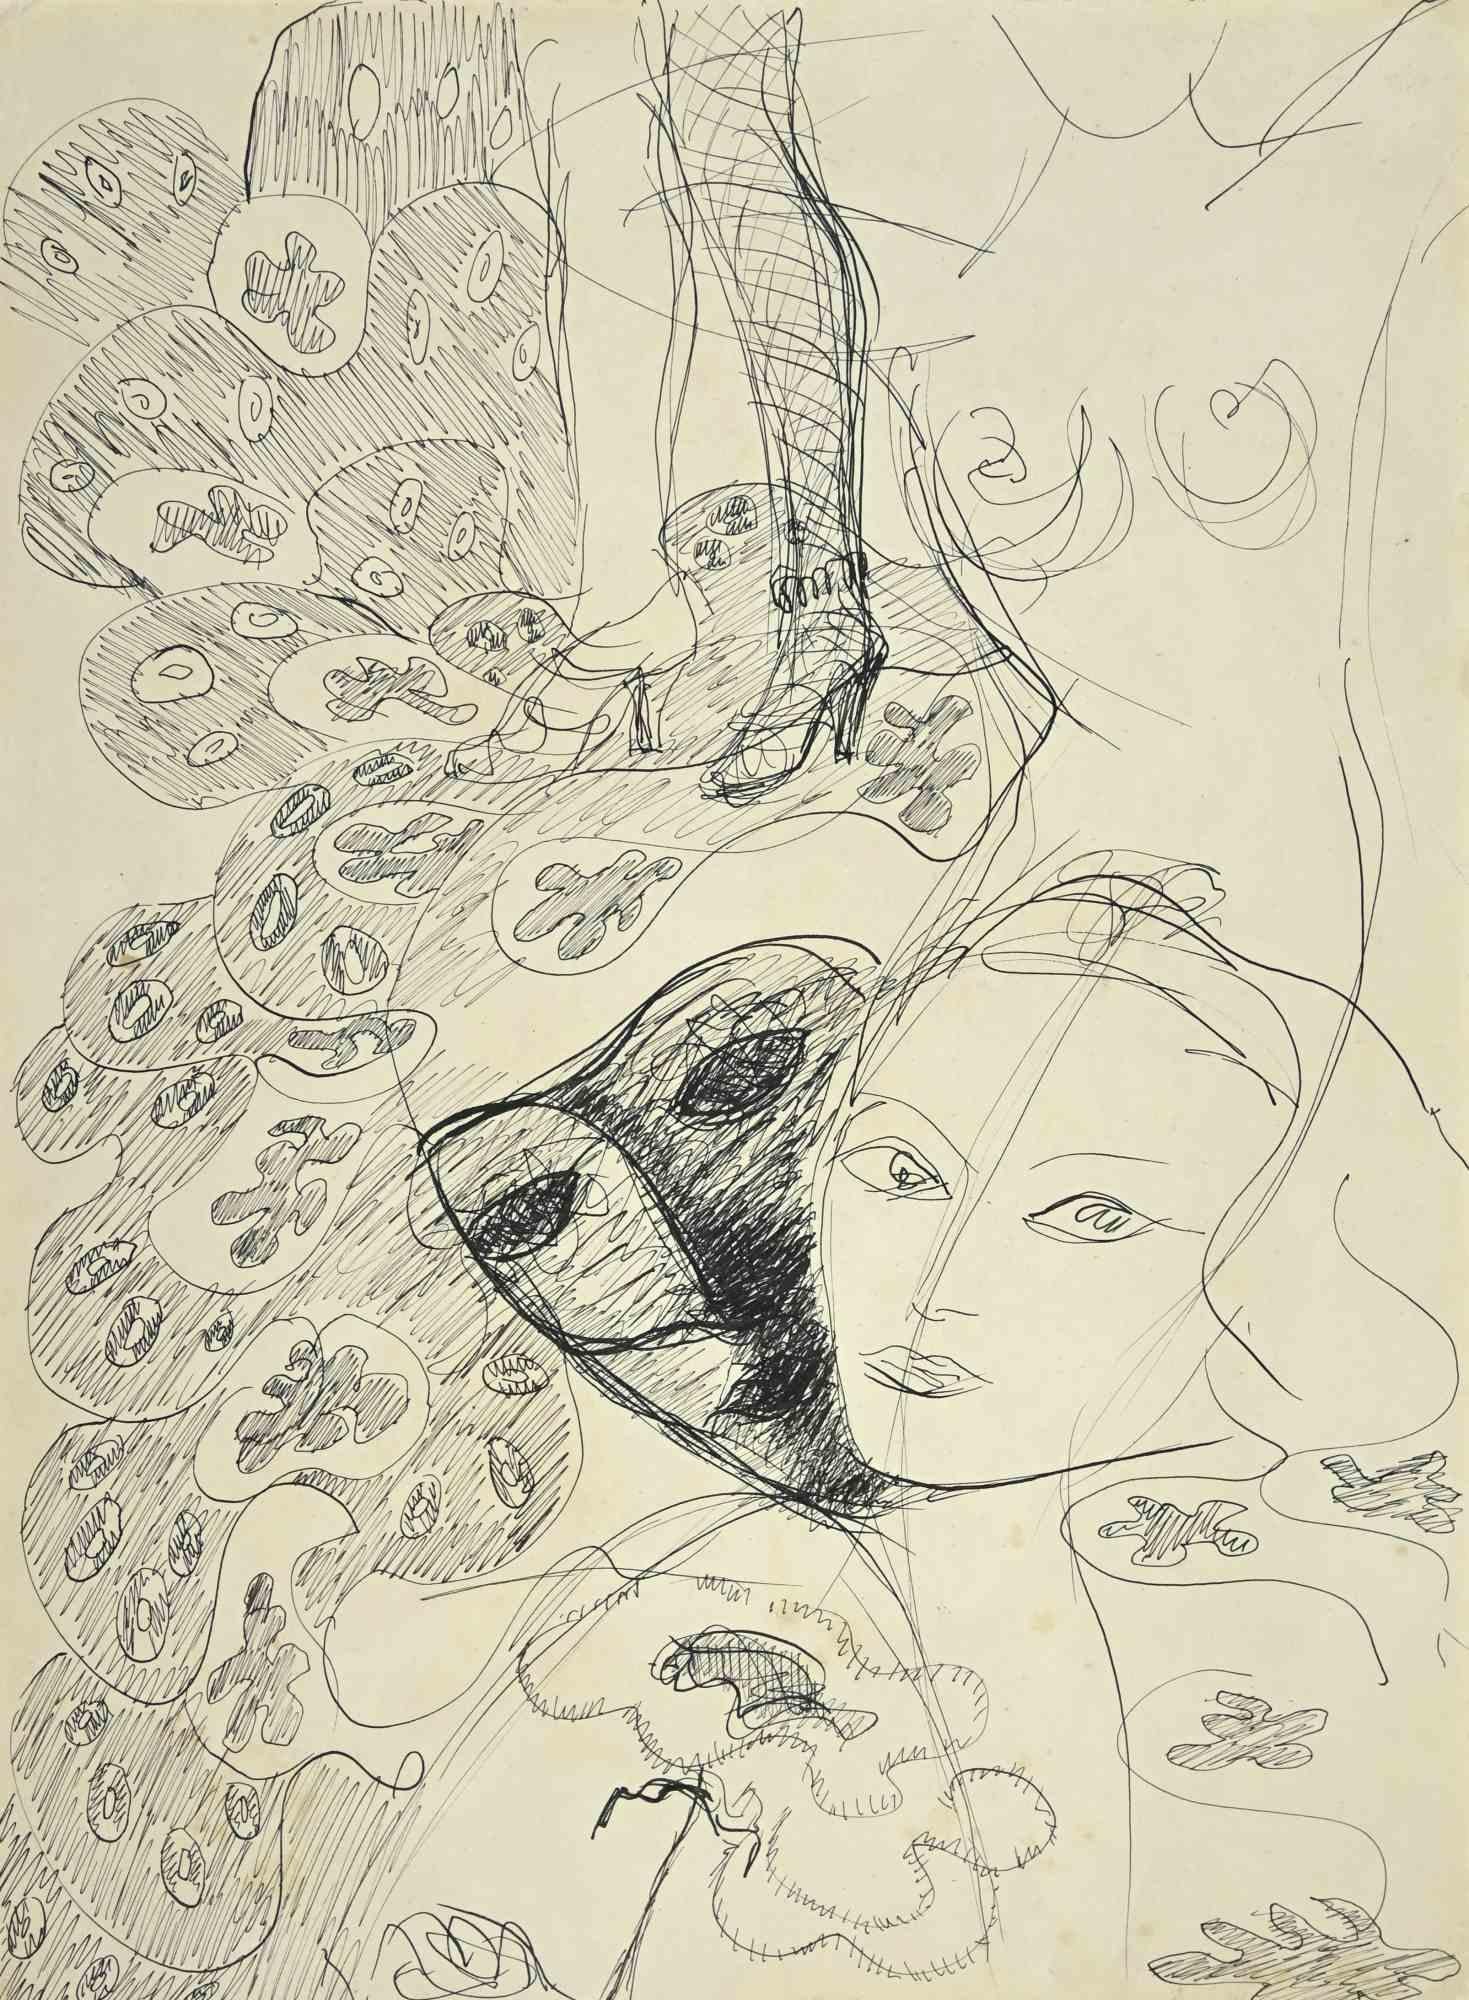 Figures  is an artwork realized by  Maurice Rouzée  in the Mid-20th Century.

Pen Drawing. 

The artwork is in good conditions .

The artwork is depicted skillfully through confident strokes with a dynamic composition.